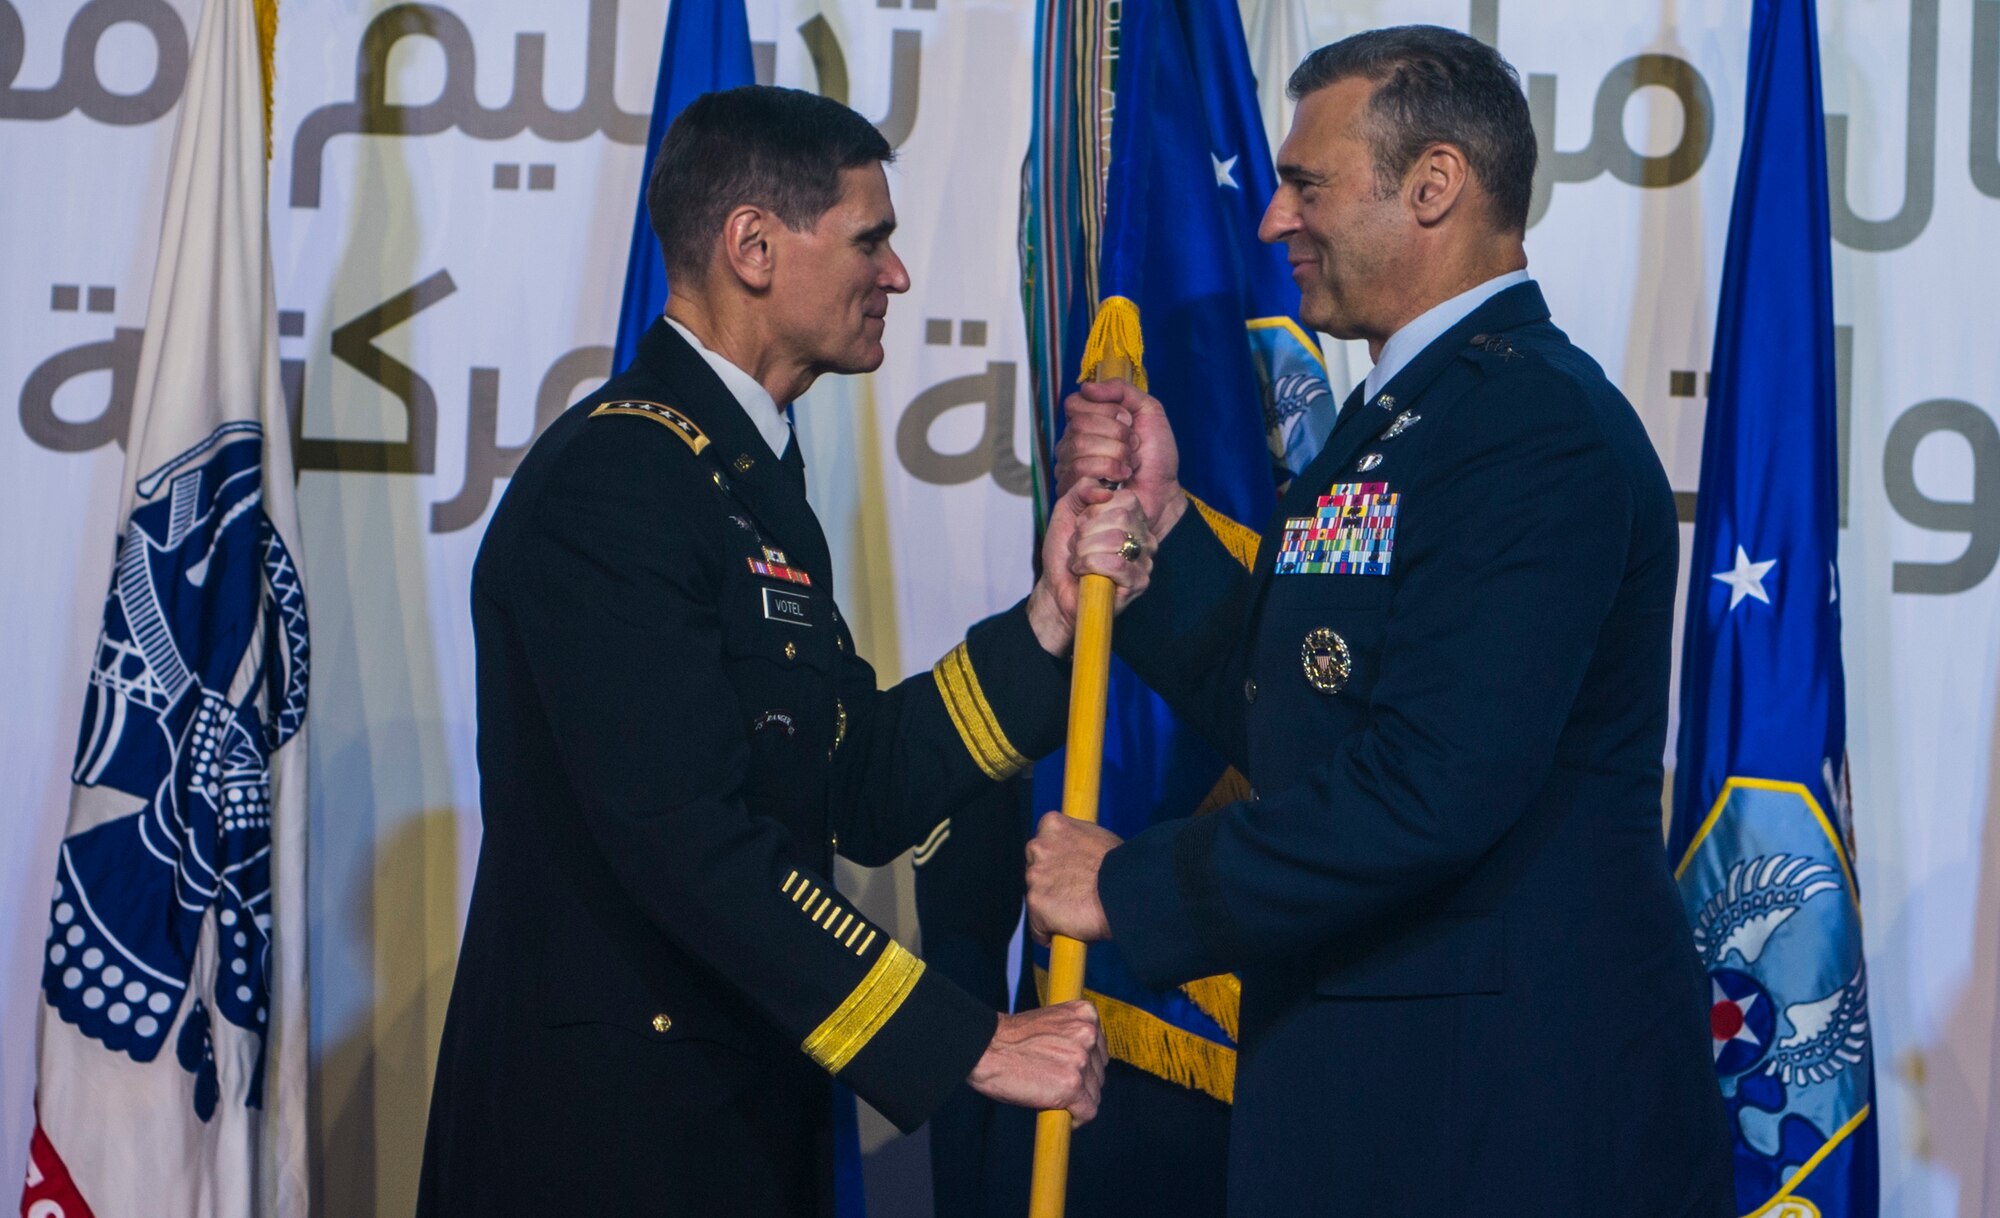 U.S. Army Gen. Joseph L. Votel, Commander of U.S. Central Command (CENTCOM), passes the guidon to U.S. Air Force Lt. Gen. Joseph T. Guastella Jr., Commander of U.S. Air Forces Central Command (AFCENT), during a change of command ceremony at Al Udeid Air Base, Qatar, Aug. 30, 2018. As the Combined Force Air Component Commander for CENTCOM, Guastella is responsible for developing contingency plans and conducting air operations in a 20-nation area of responsibility covering Central and Southwest Asia. AFCENT, in concert with coalition, joint, and interagency partners, delivers decisive air, space and cyberspace capabilities for CENTCOM, allied nations, and America. (U.S. Air Force photo by Senior Airman Xavier Navarro)